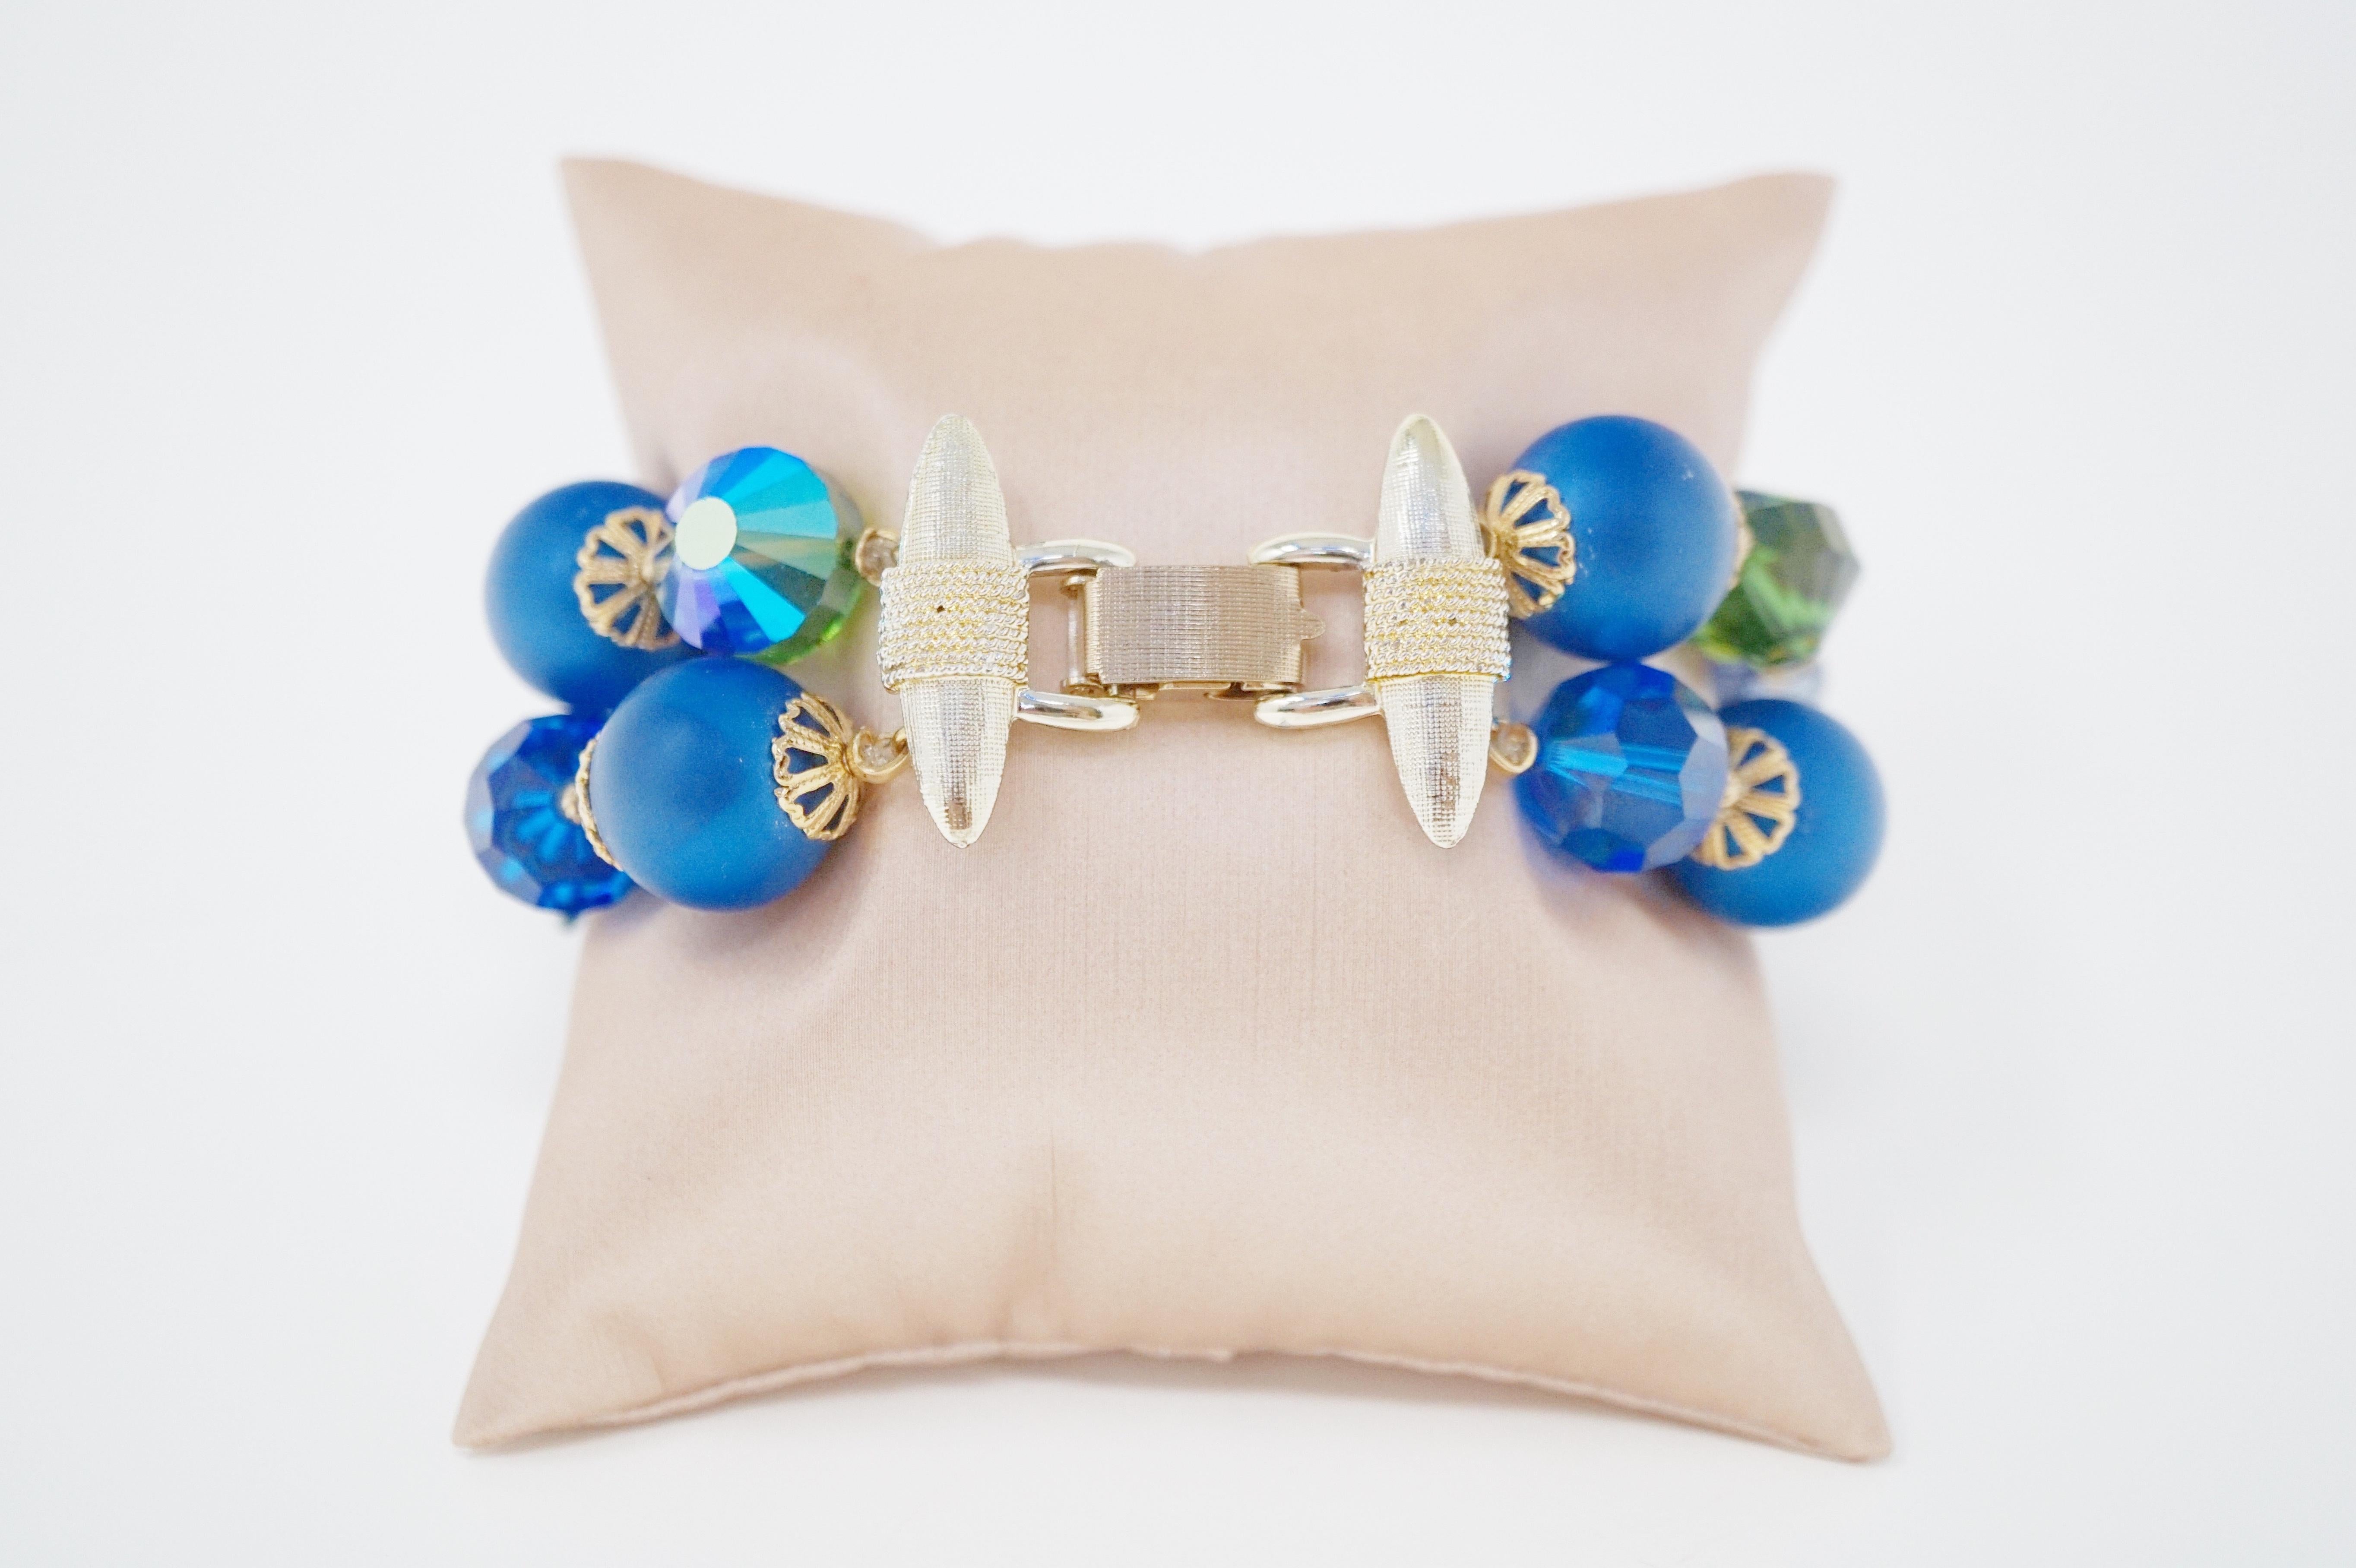 Vendome Beaded Bracelet with Aurora Borealis Crystals, circa 1950, Signed For Sale 3